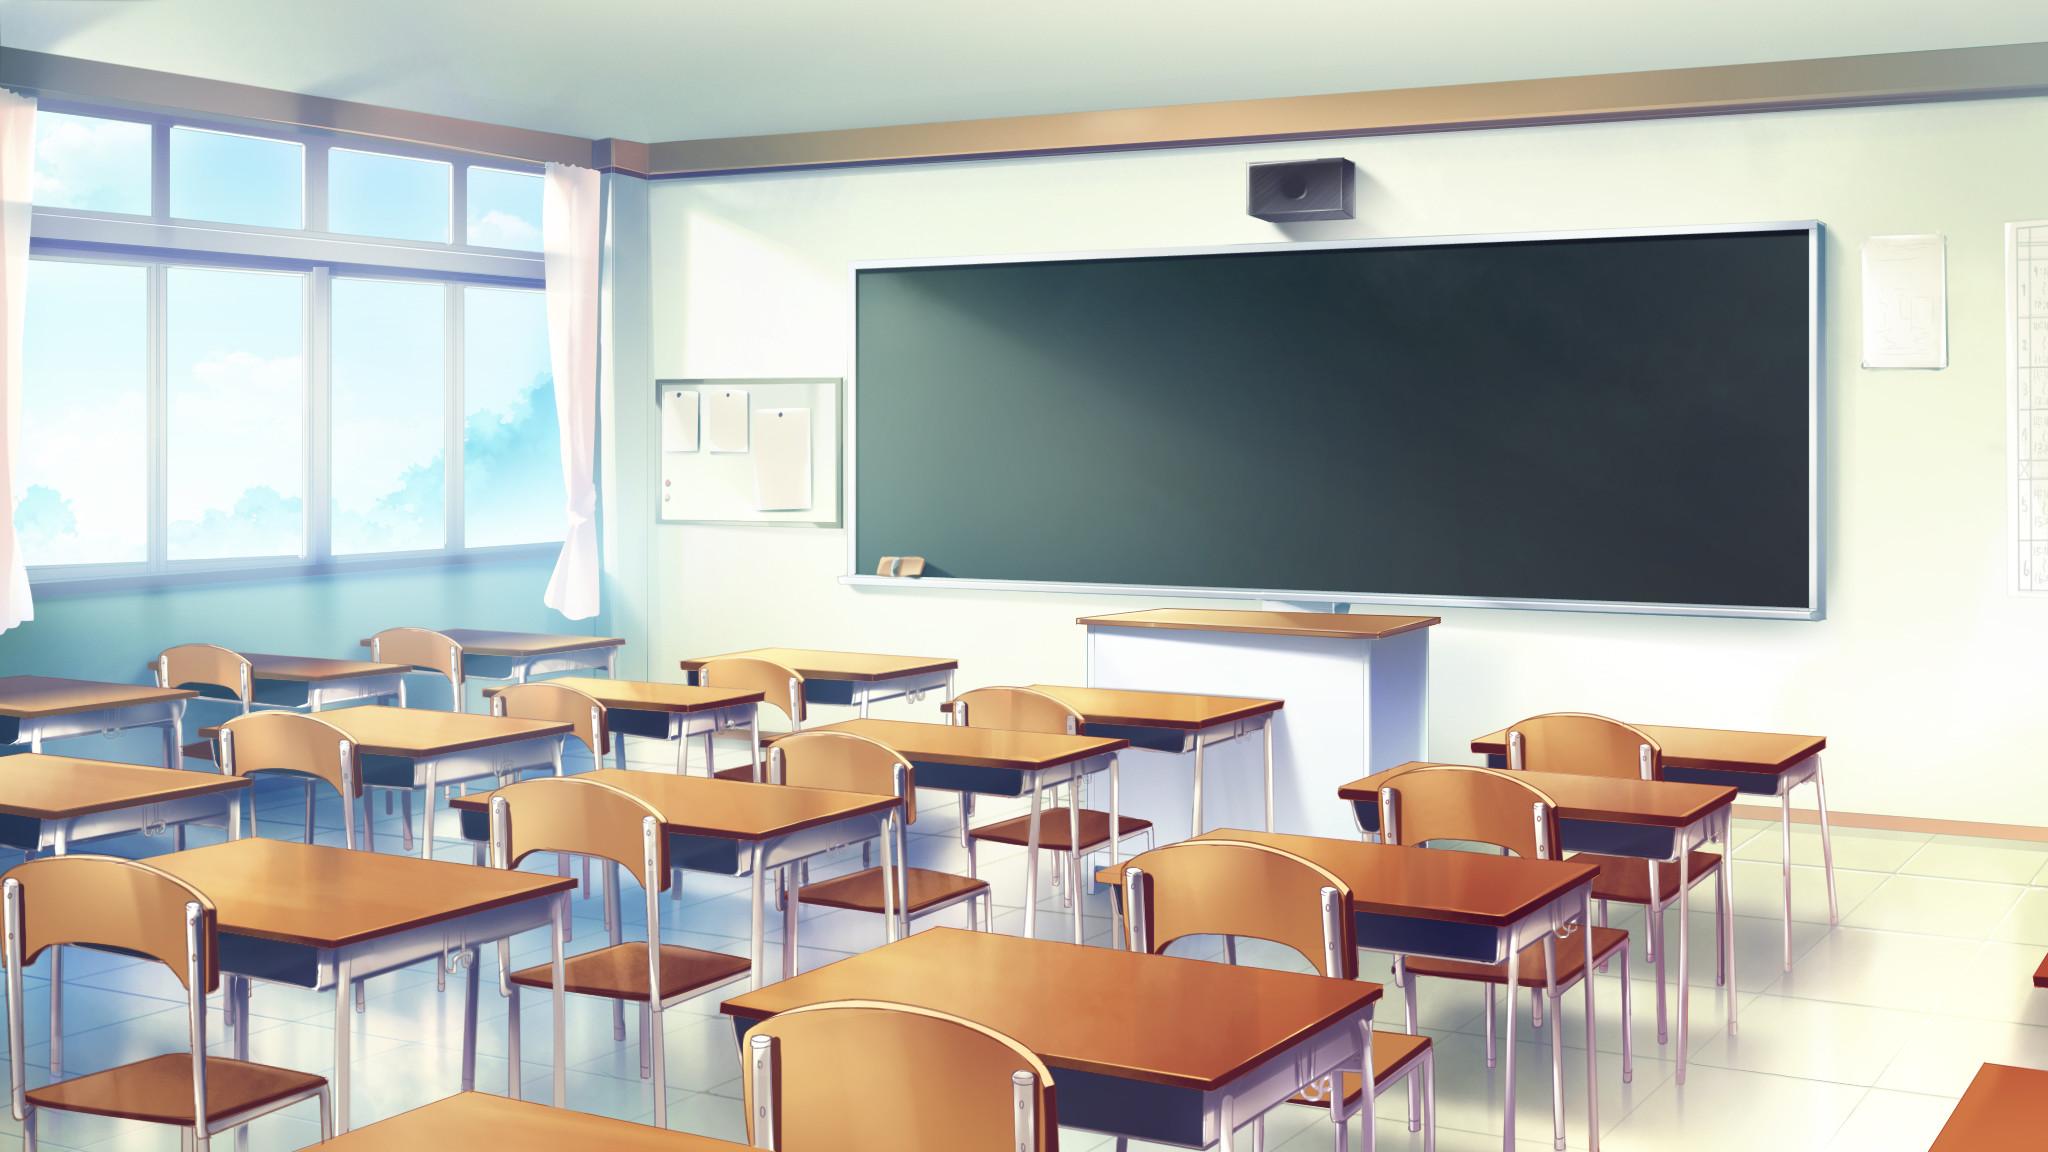 Anime Background Concept School Classroom View Stock Vector (Royalty Free)  2316304623